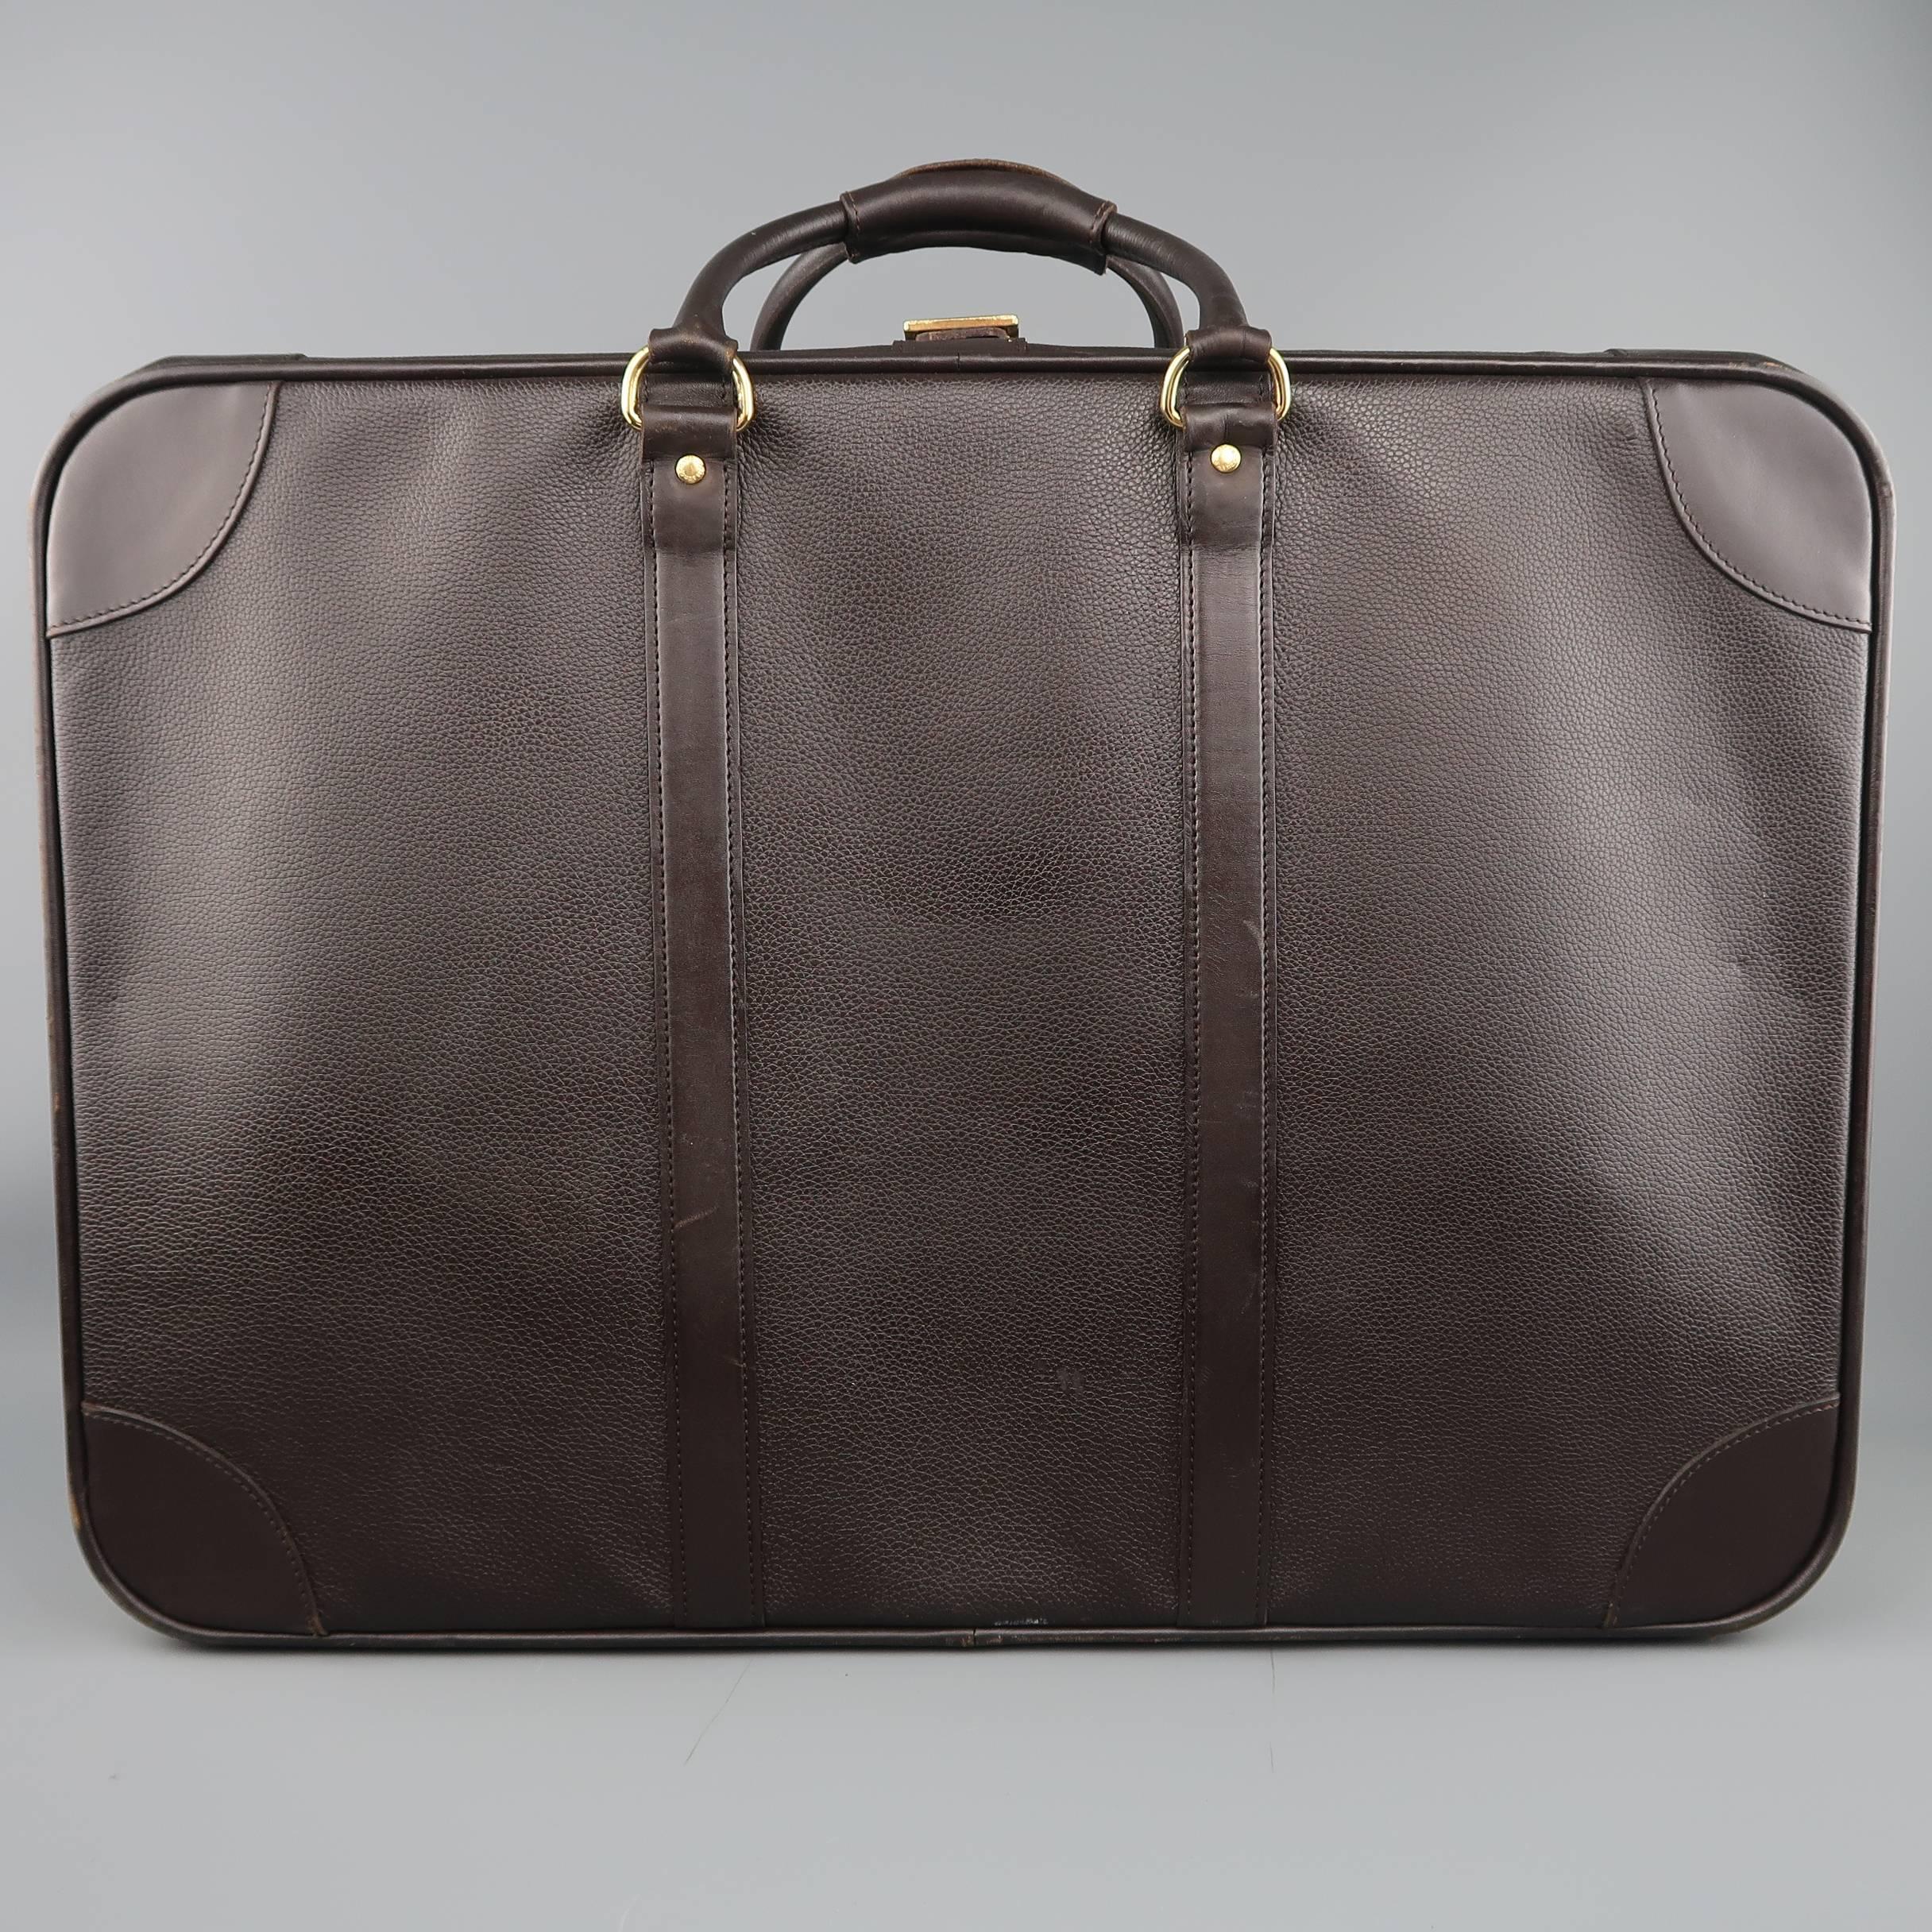 Vintage LONGCHAMP suitcase travel bag comes in chocolate brown pebbled leather in a large rectangular box shape with covered snap tab top handles and zip closure with buckle. Wear throughout. As-Is. Made in France.
 
Fair Pre-Owned Condition.
